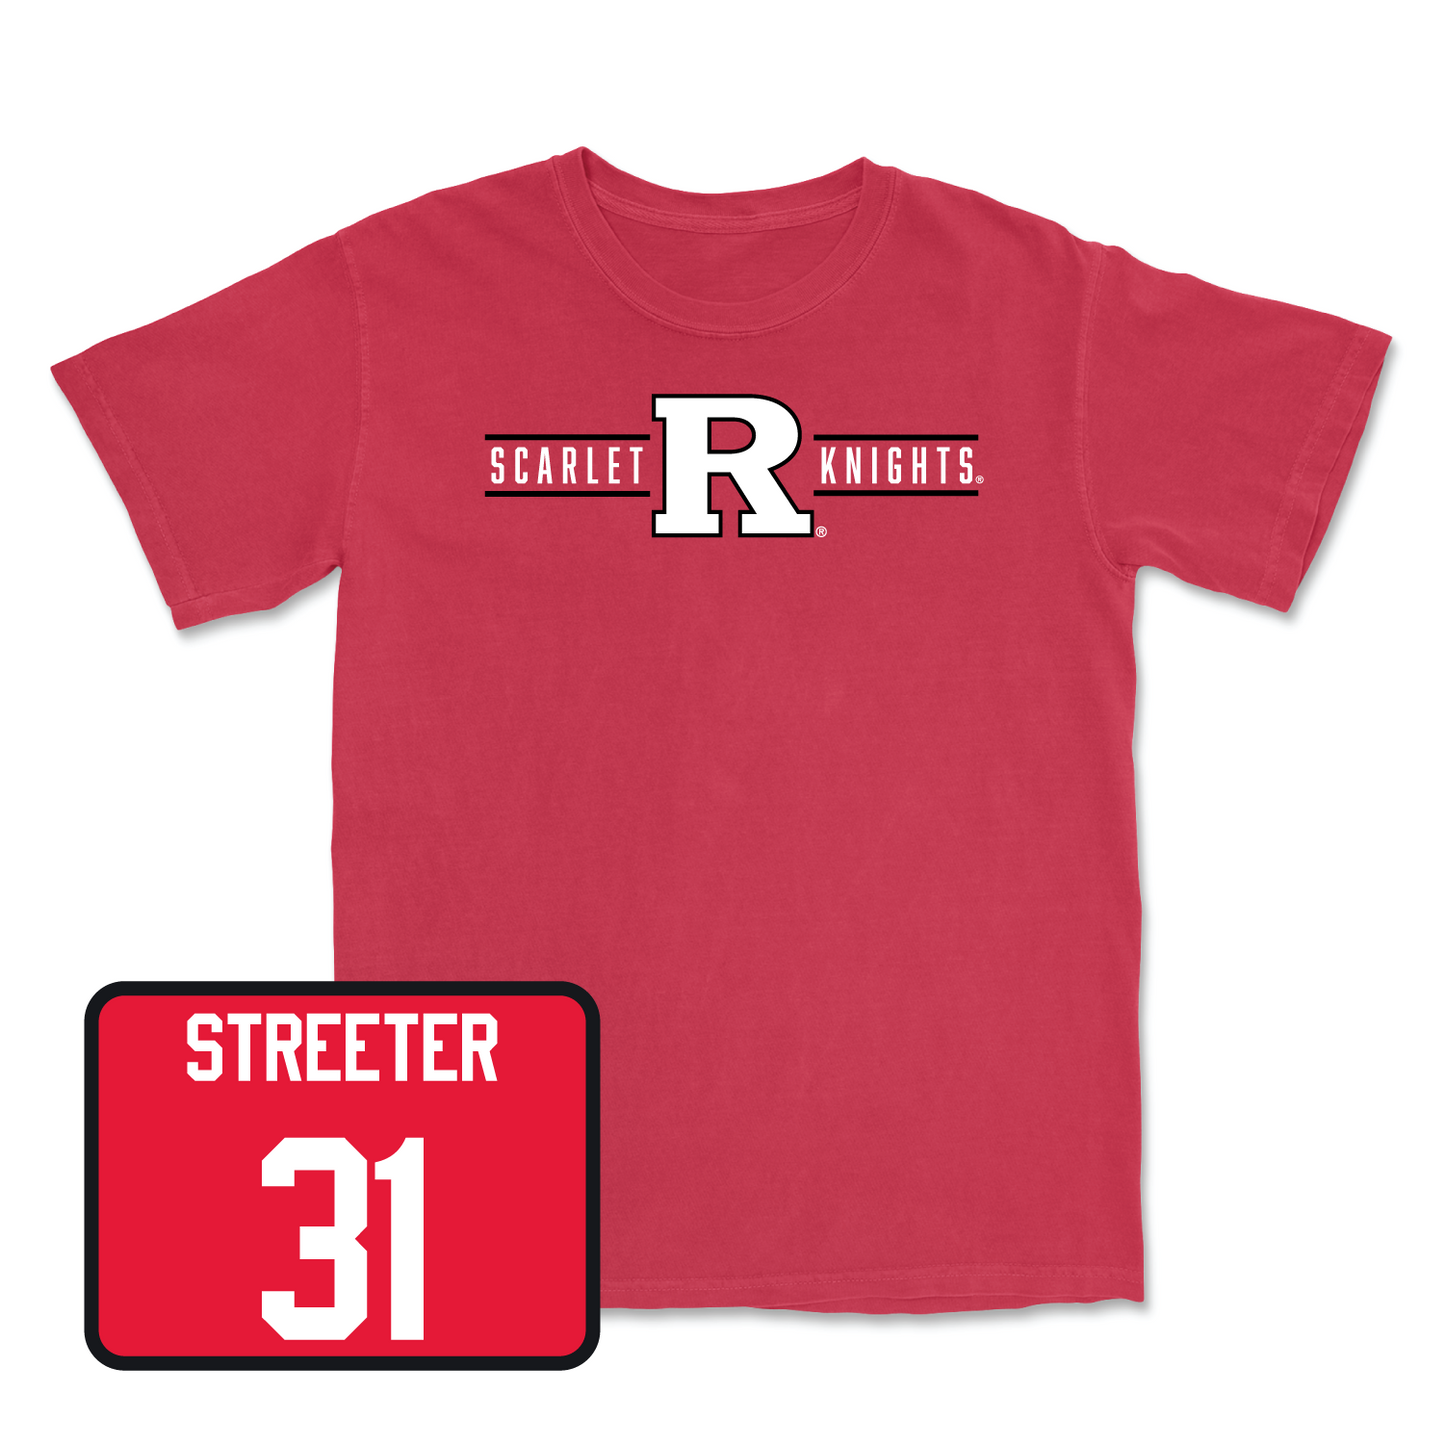 Red Women's Basketball Scarlet Knights Tee